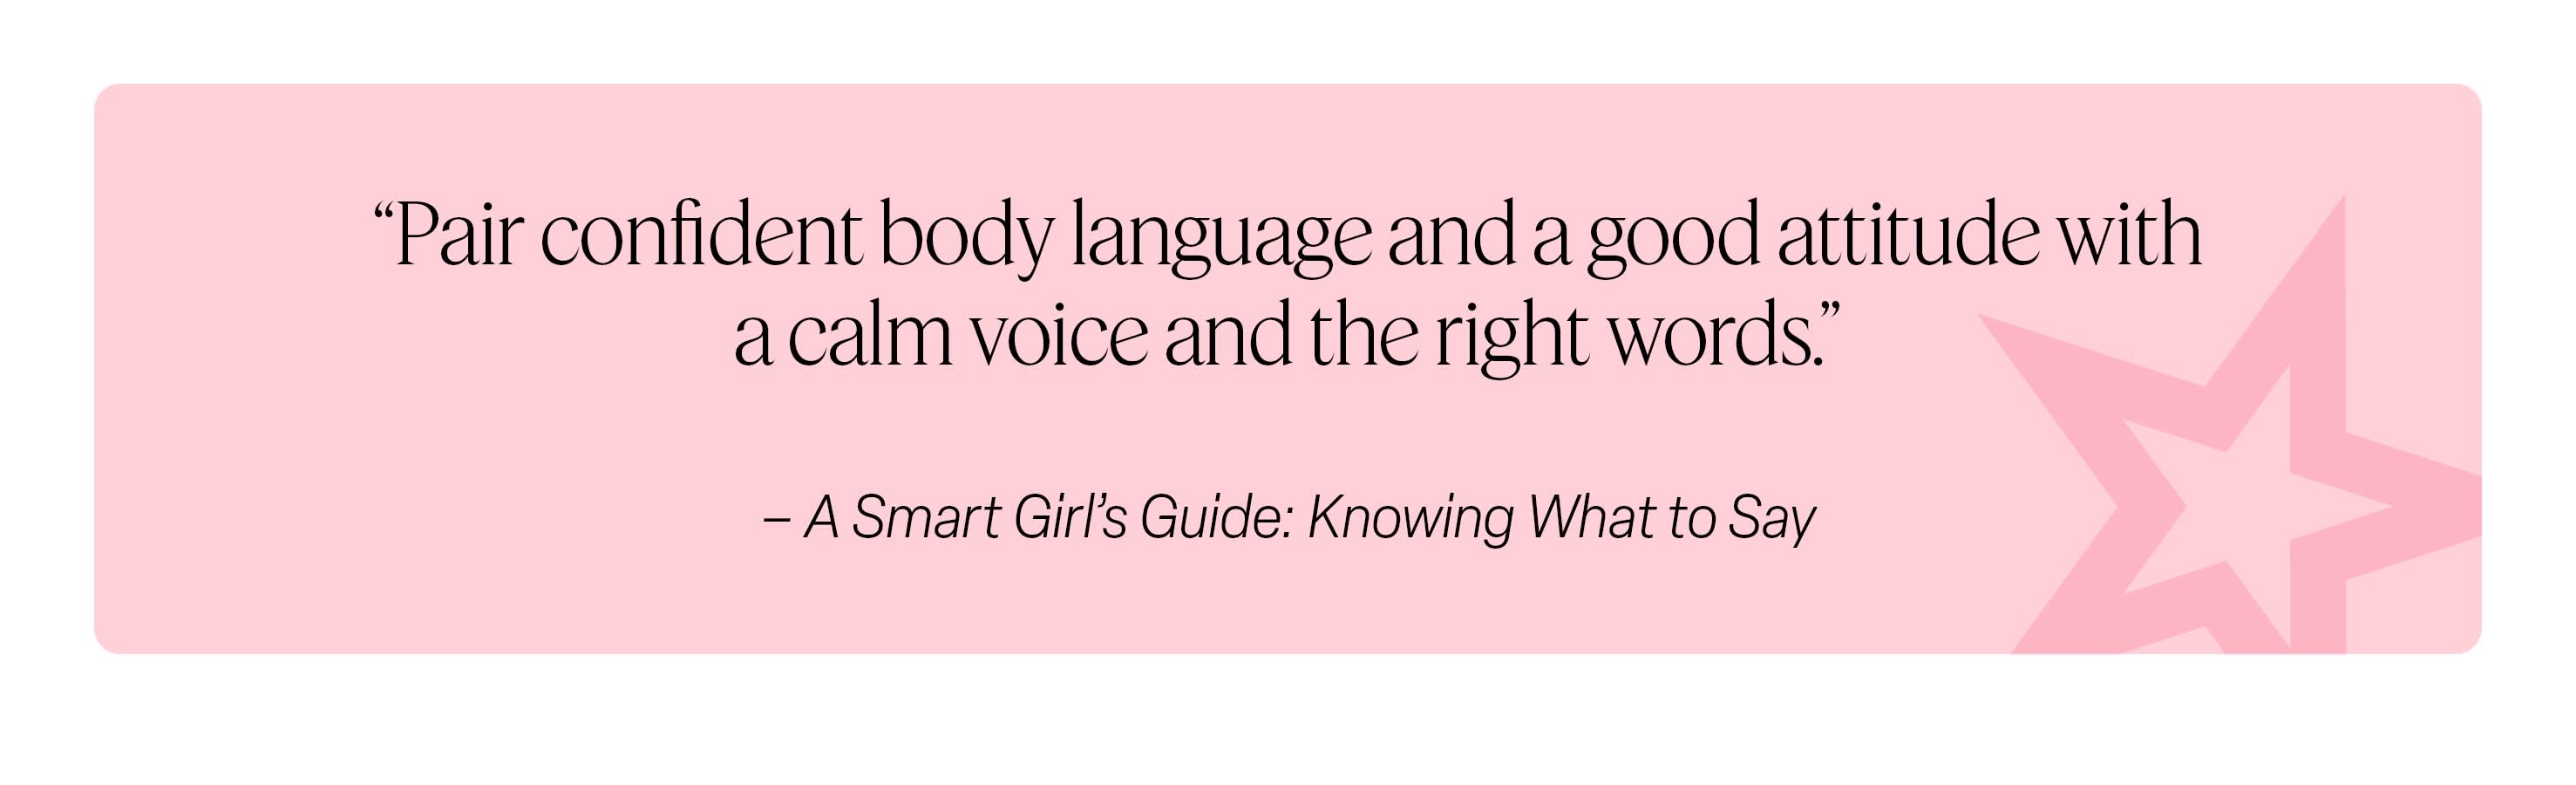 Quote from A Smart Girl's Guide: Knowing What to Say